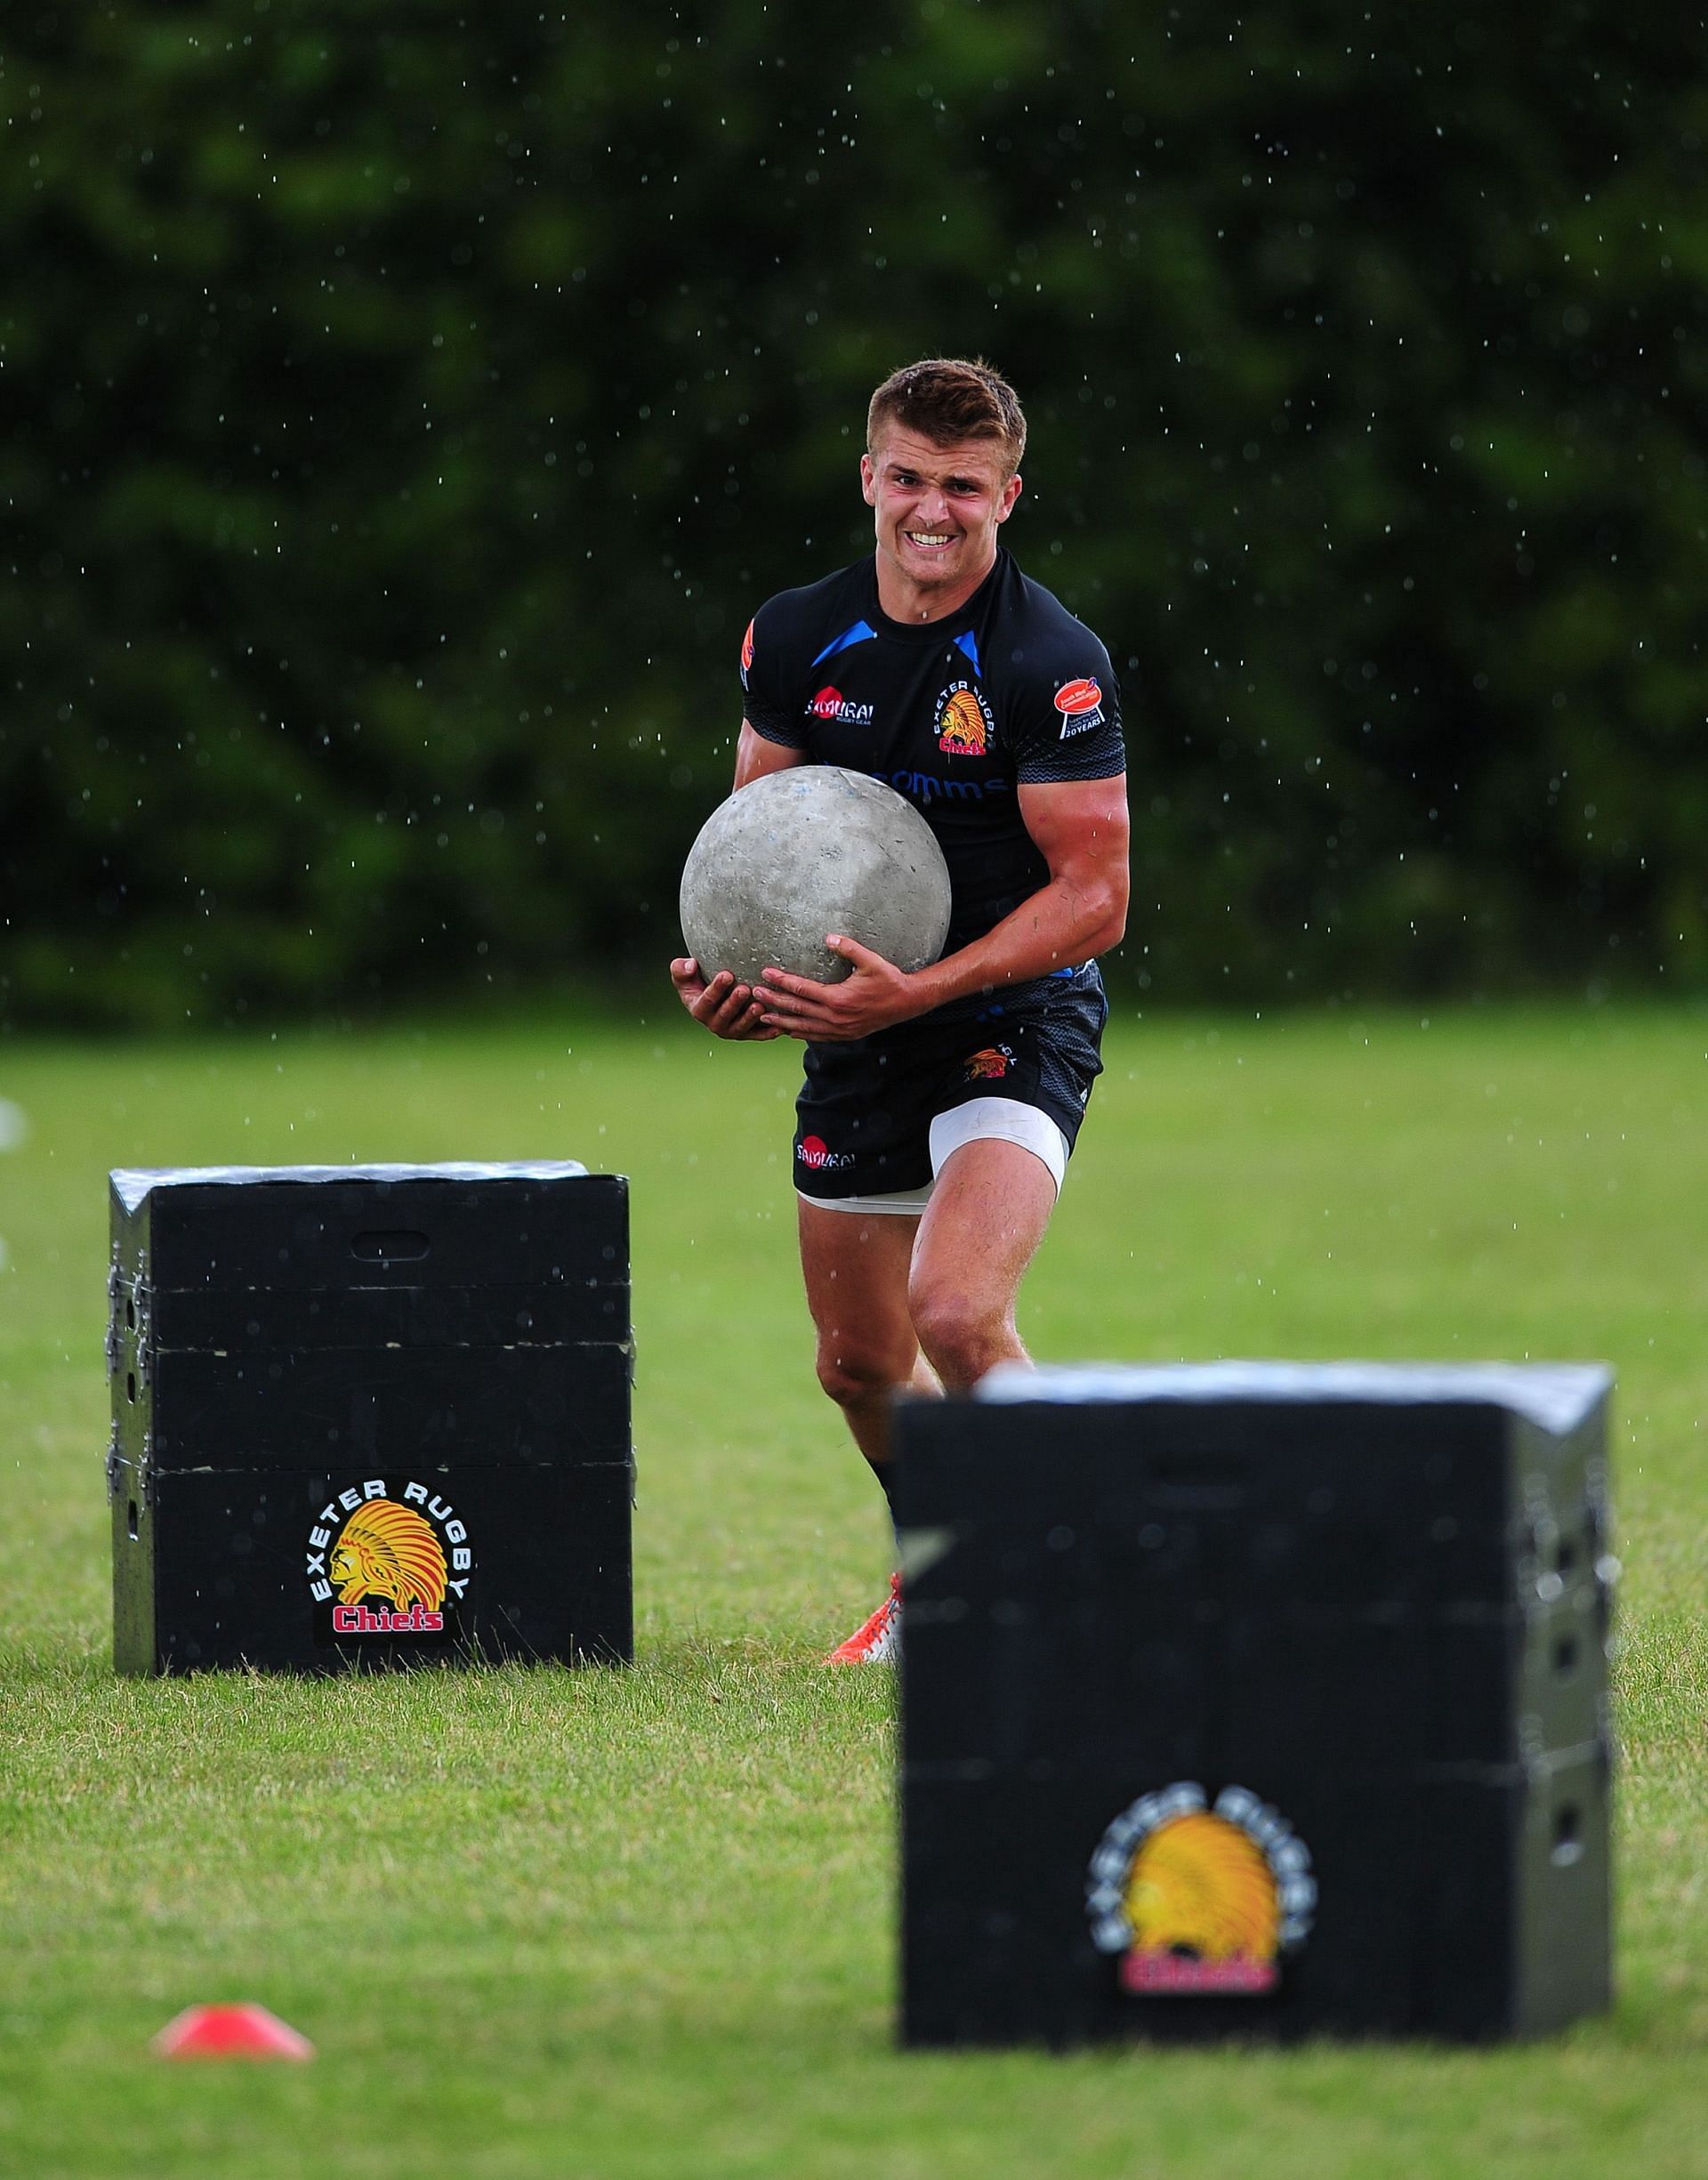 Exeter Chiefs Training Session (Image credits: Getty Images)